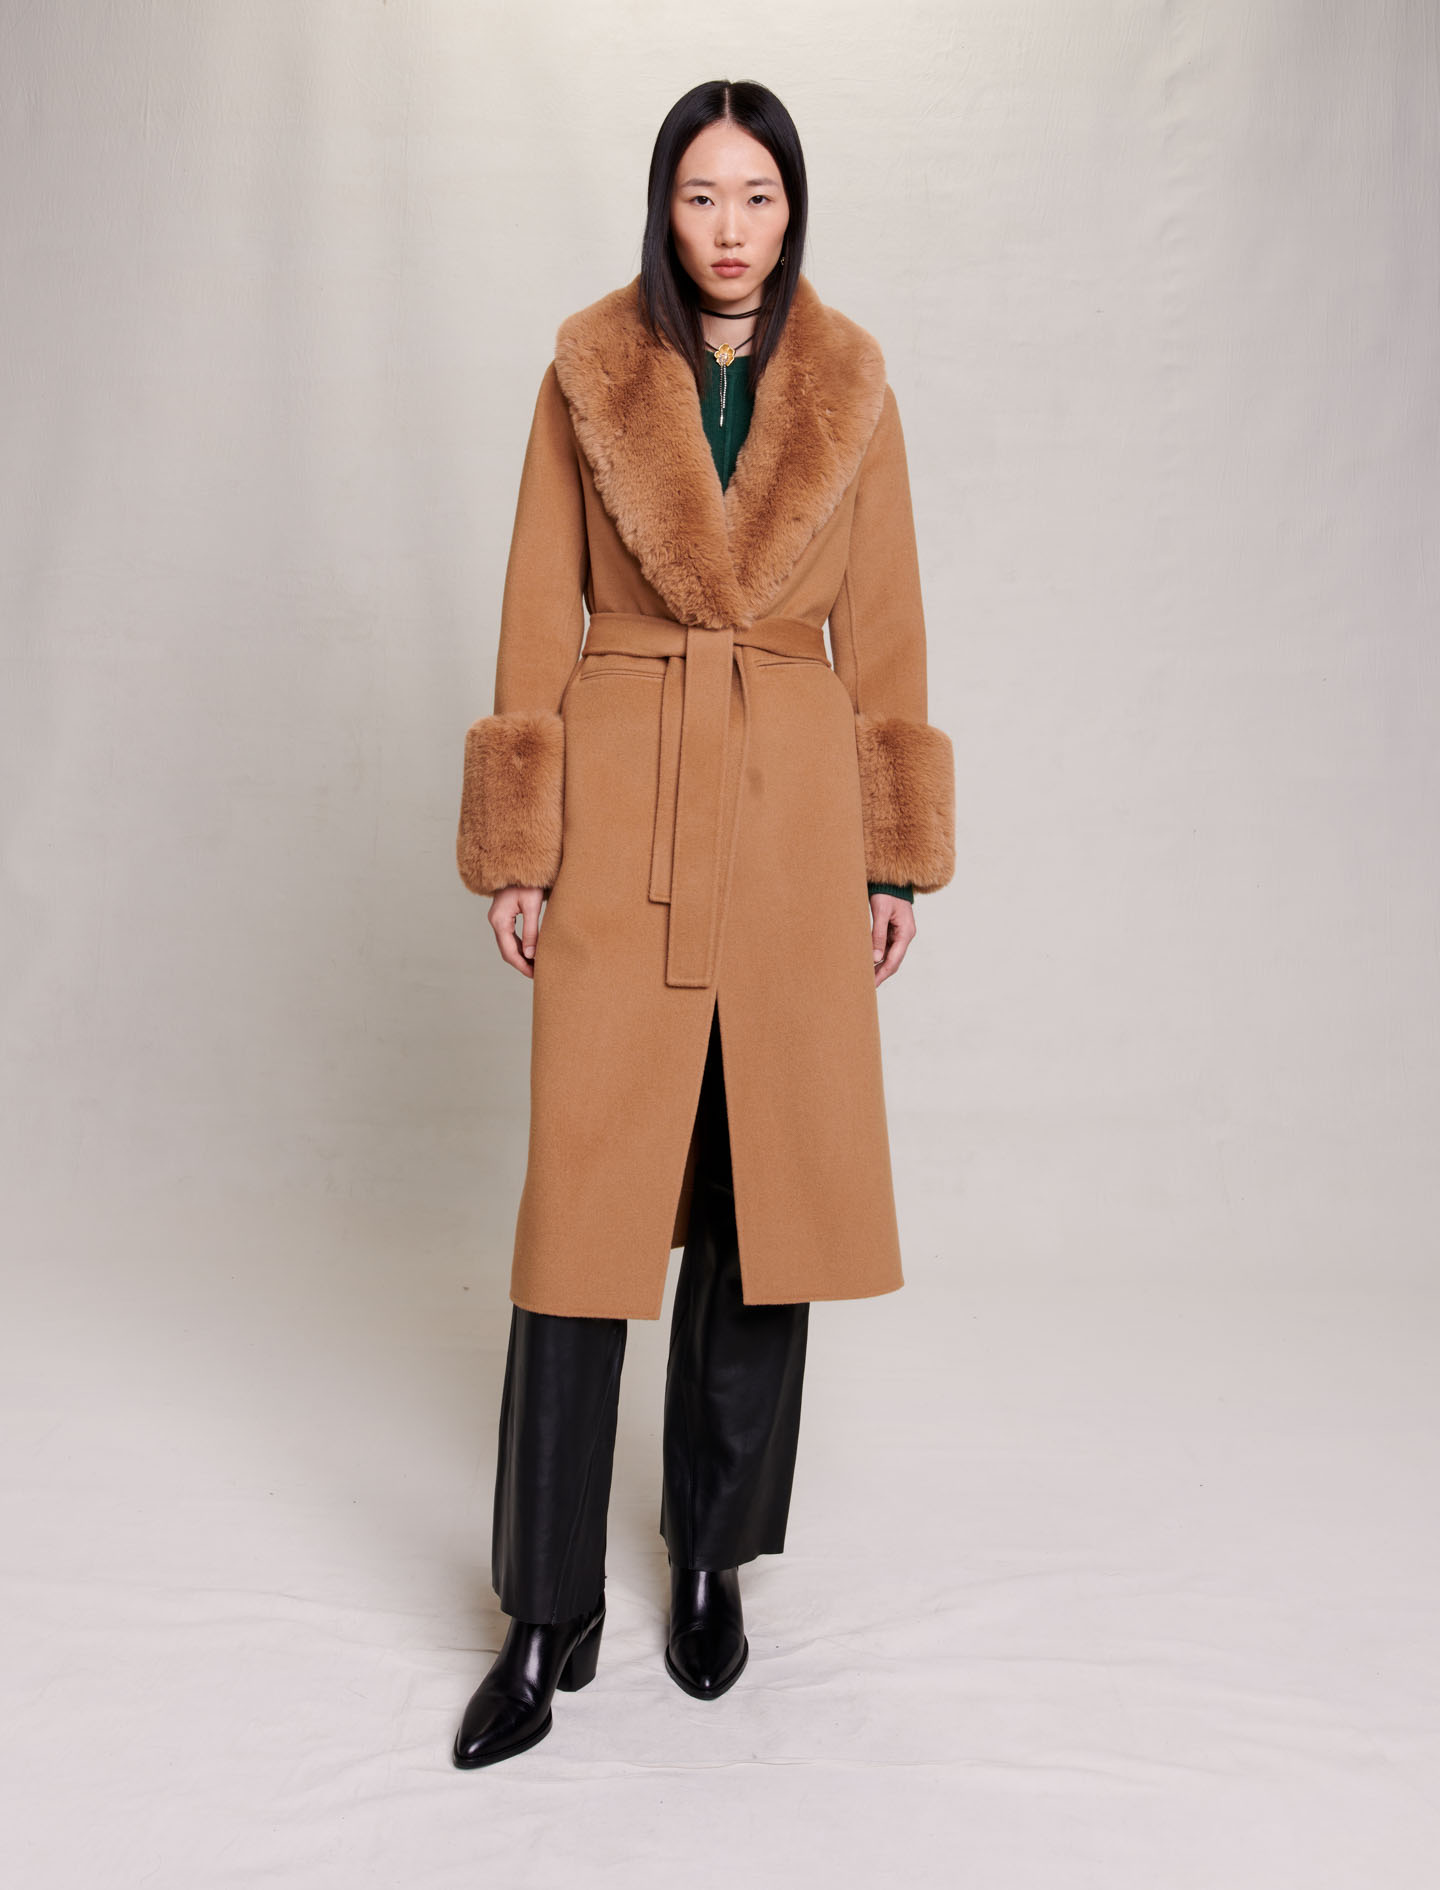 Maje Woman's wool, 123GALAXYTO for Fall/Winter, in color Camel / Brown